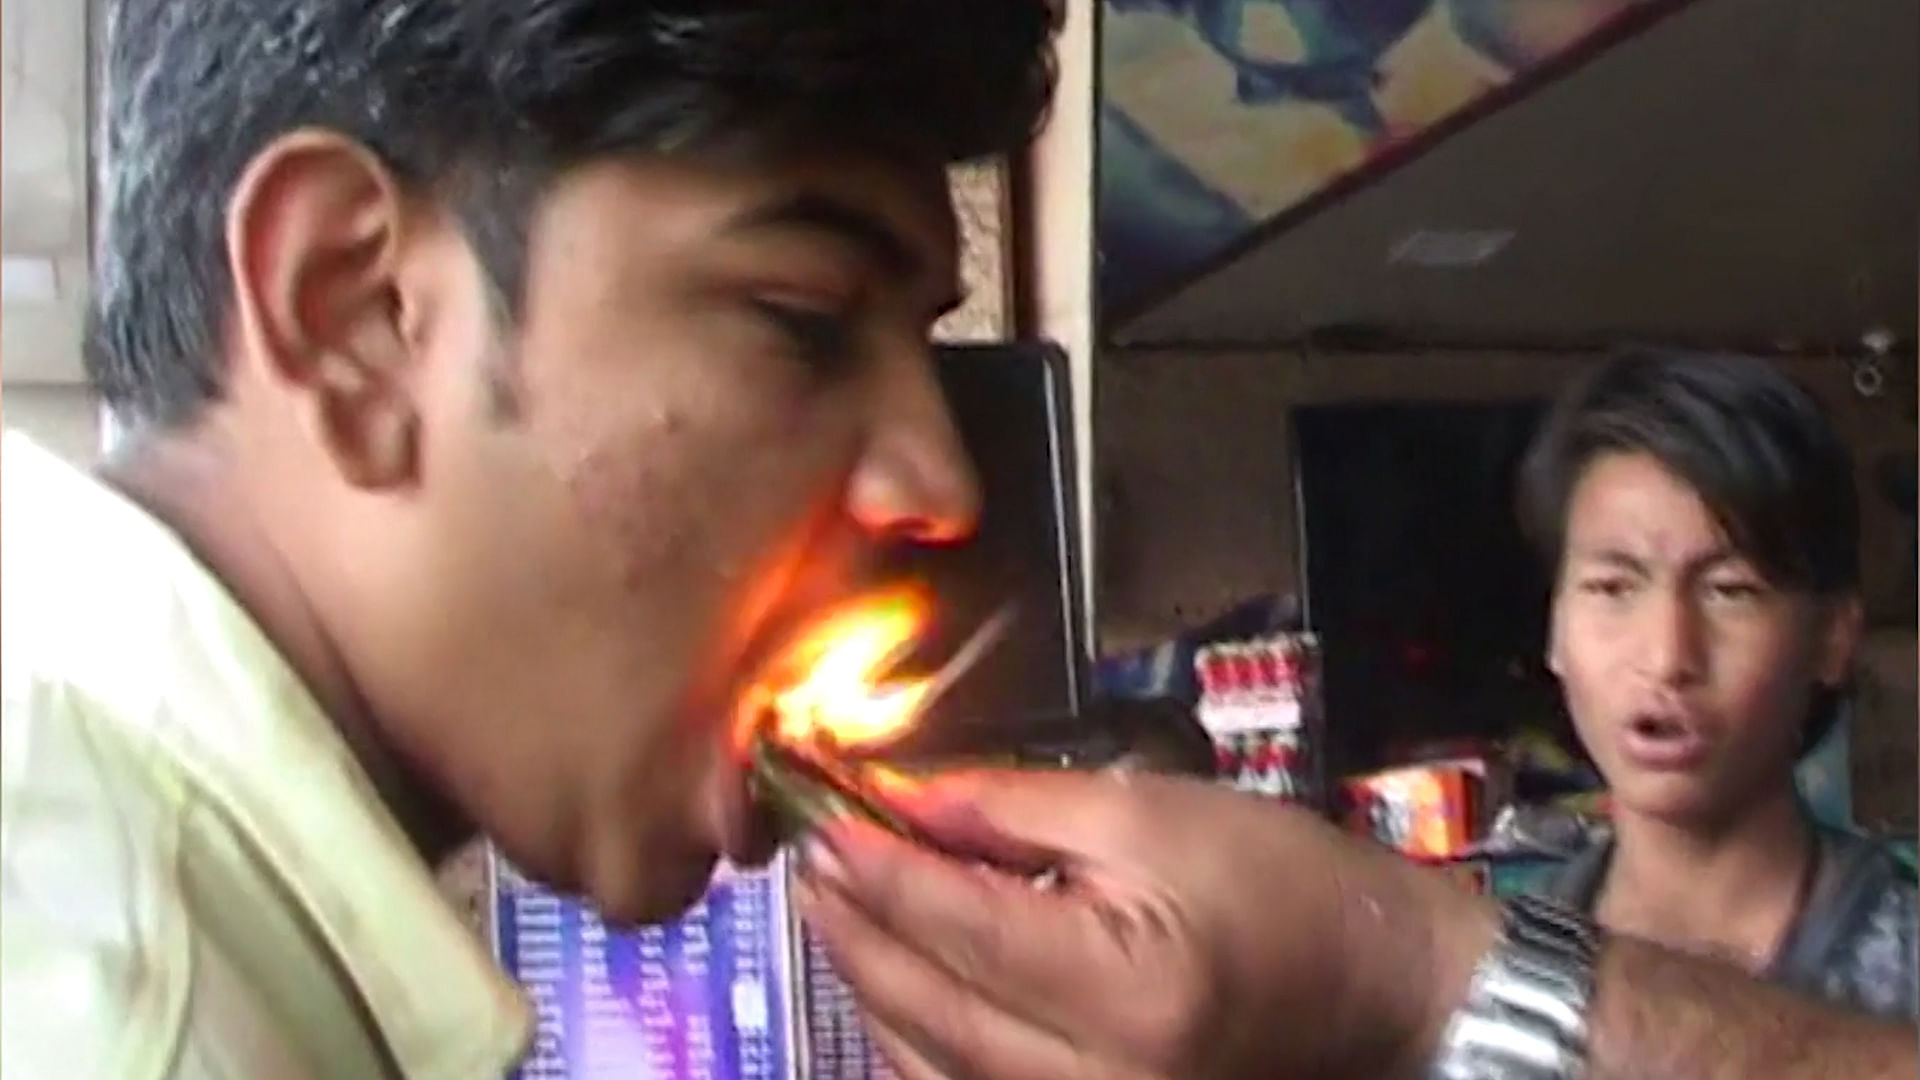 A paan seller in Gujarat has created a mouth freshener that is consumed after setting it on fire. (Photo: AP screengrab)